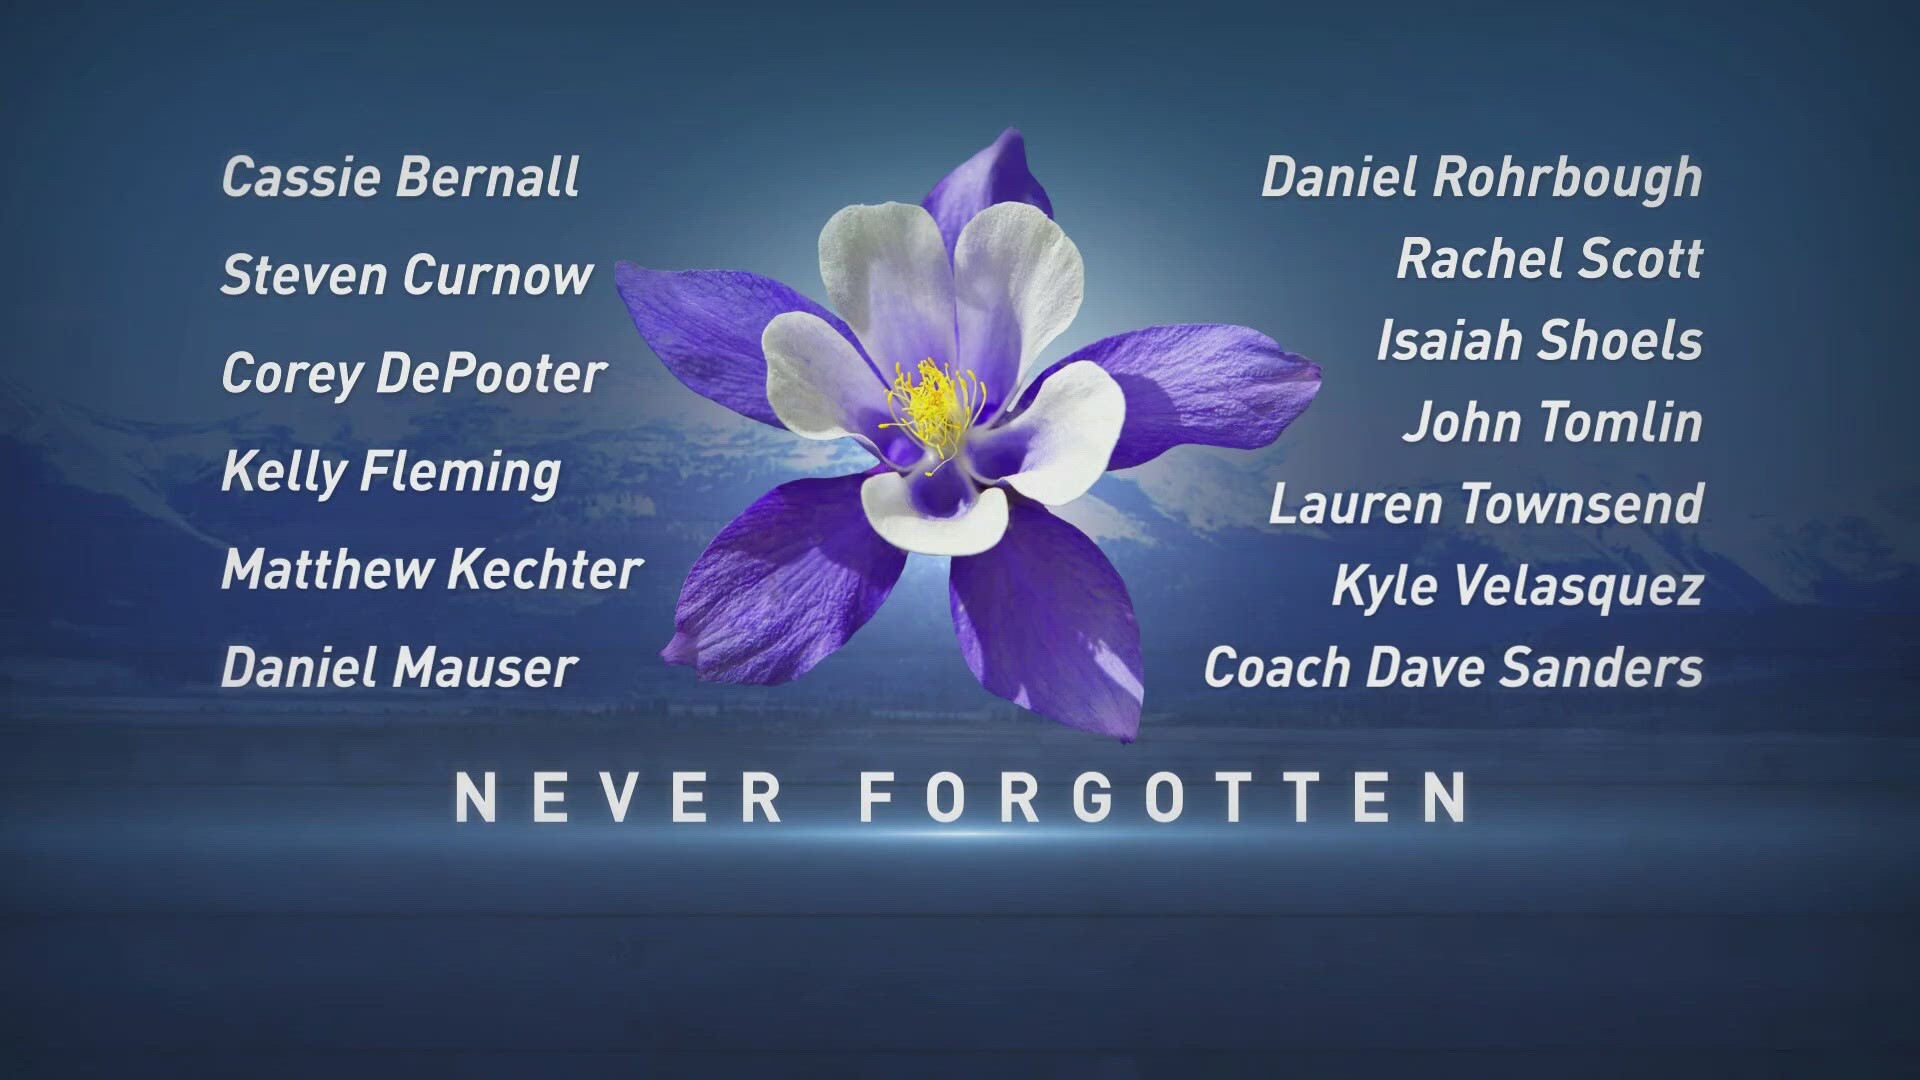 On April 20, 1999, 13 people were killed at Columbine high school. Twenty four years later, we're remembering the lives lost.